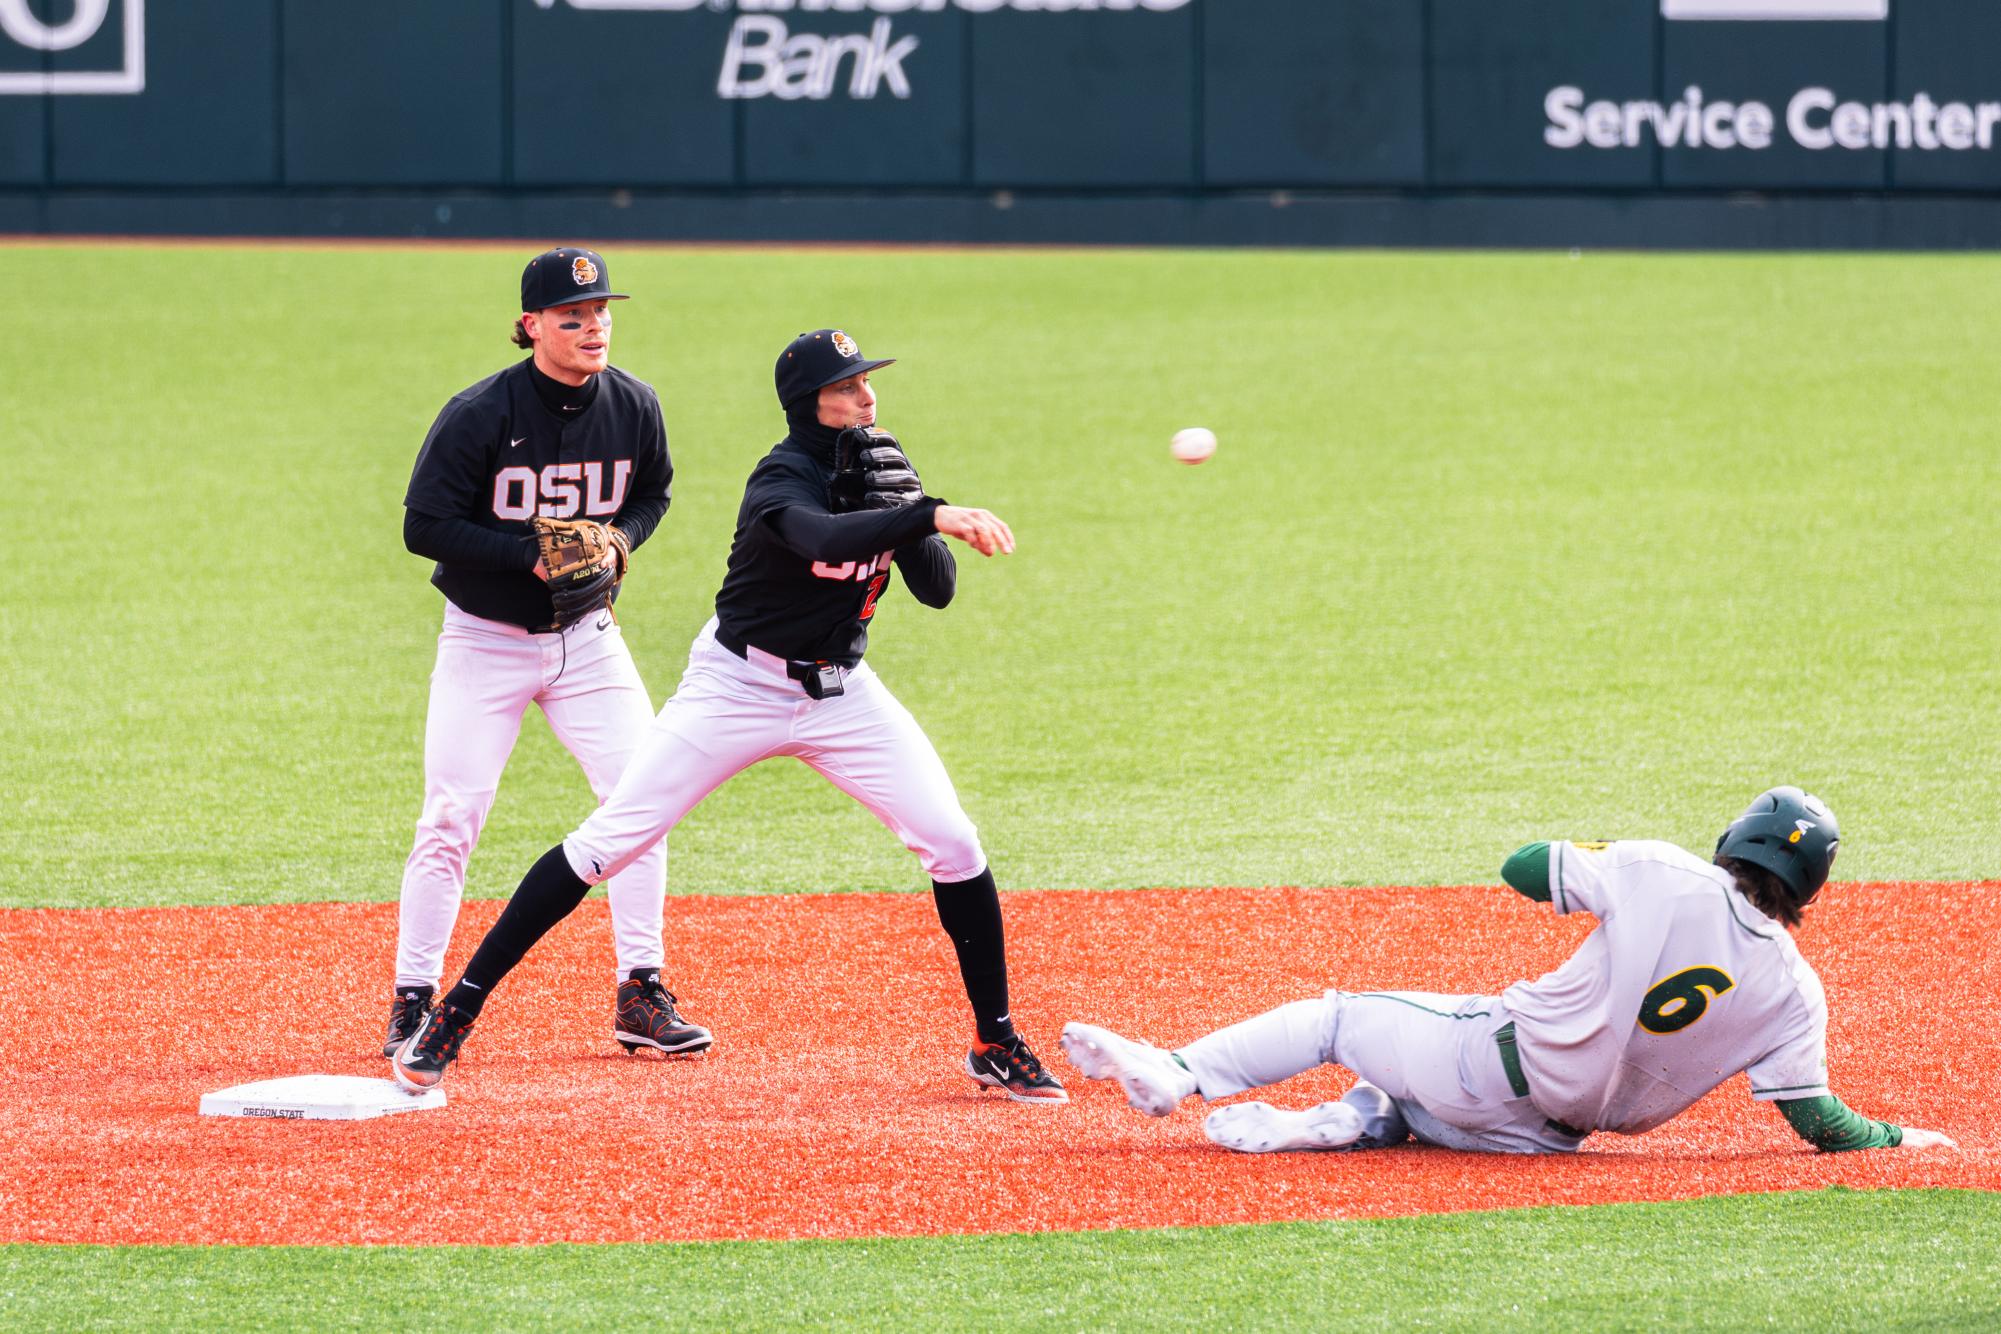 Jabin Trosky (2) throws the ball to first base as NDSU player (6) slides into second base at Goss Stadium at Coleman Field on March 3 in Corvallis, Oregon.